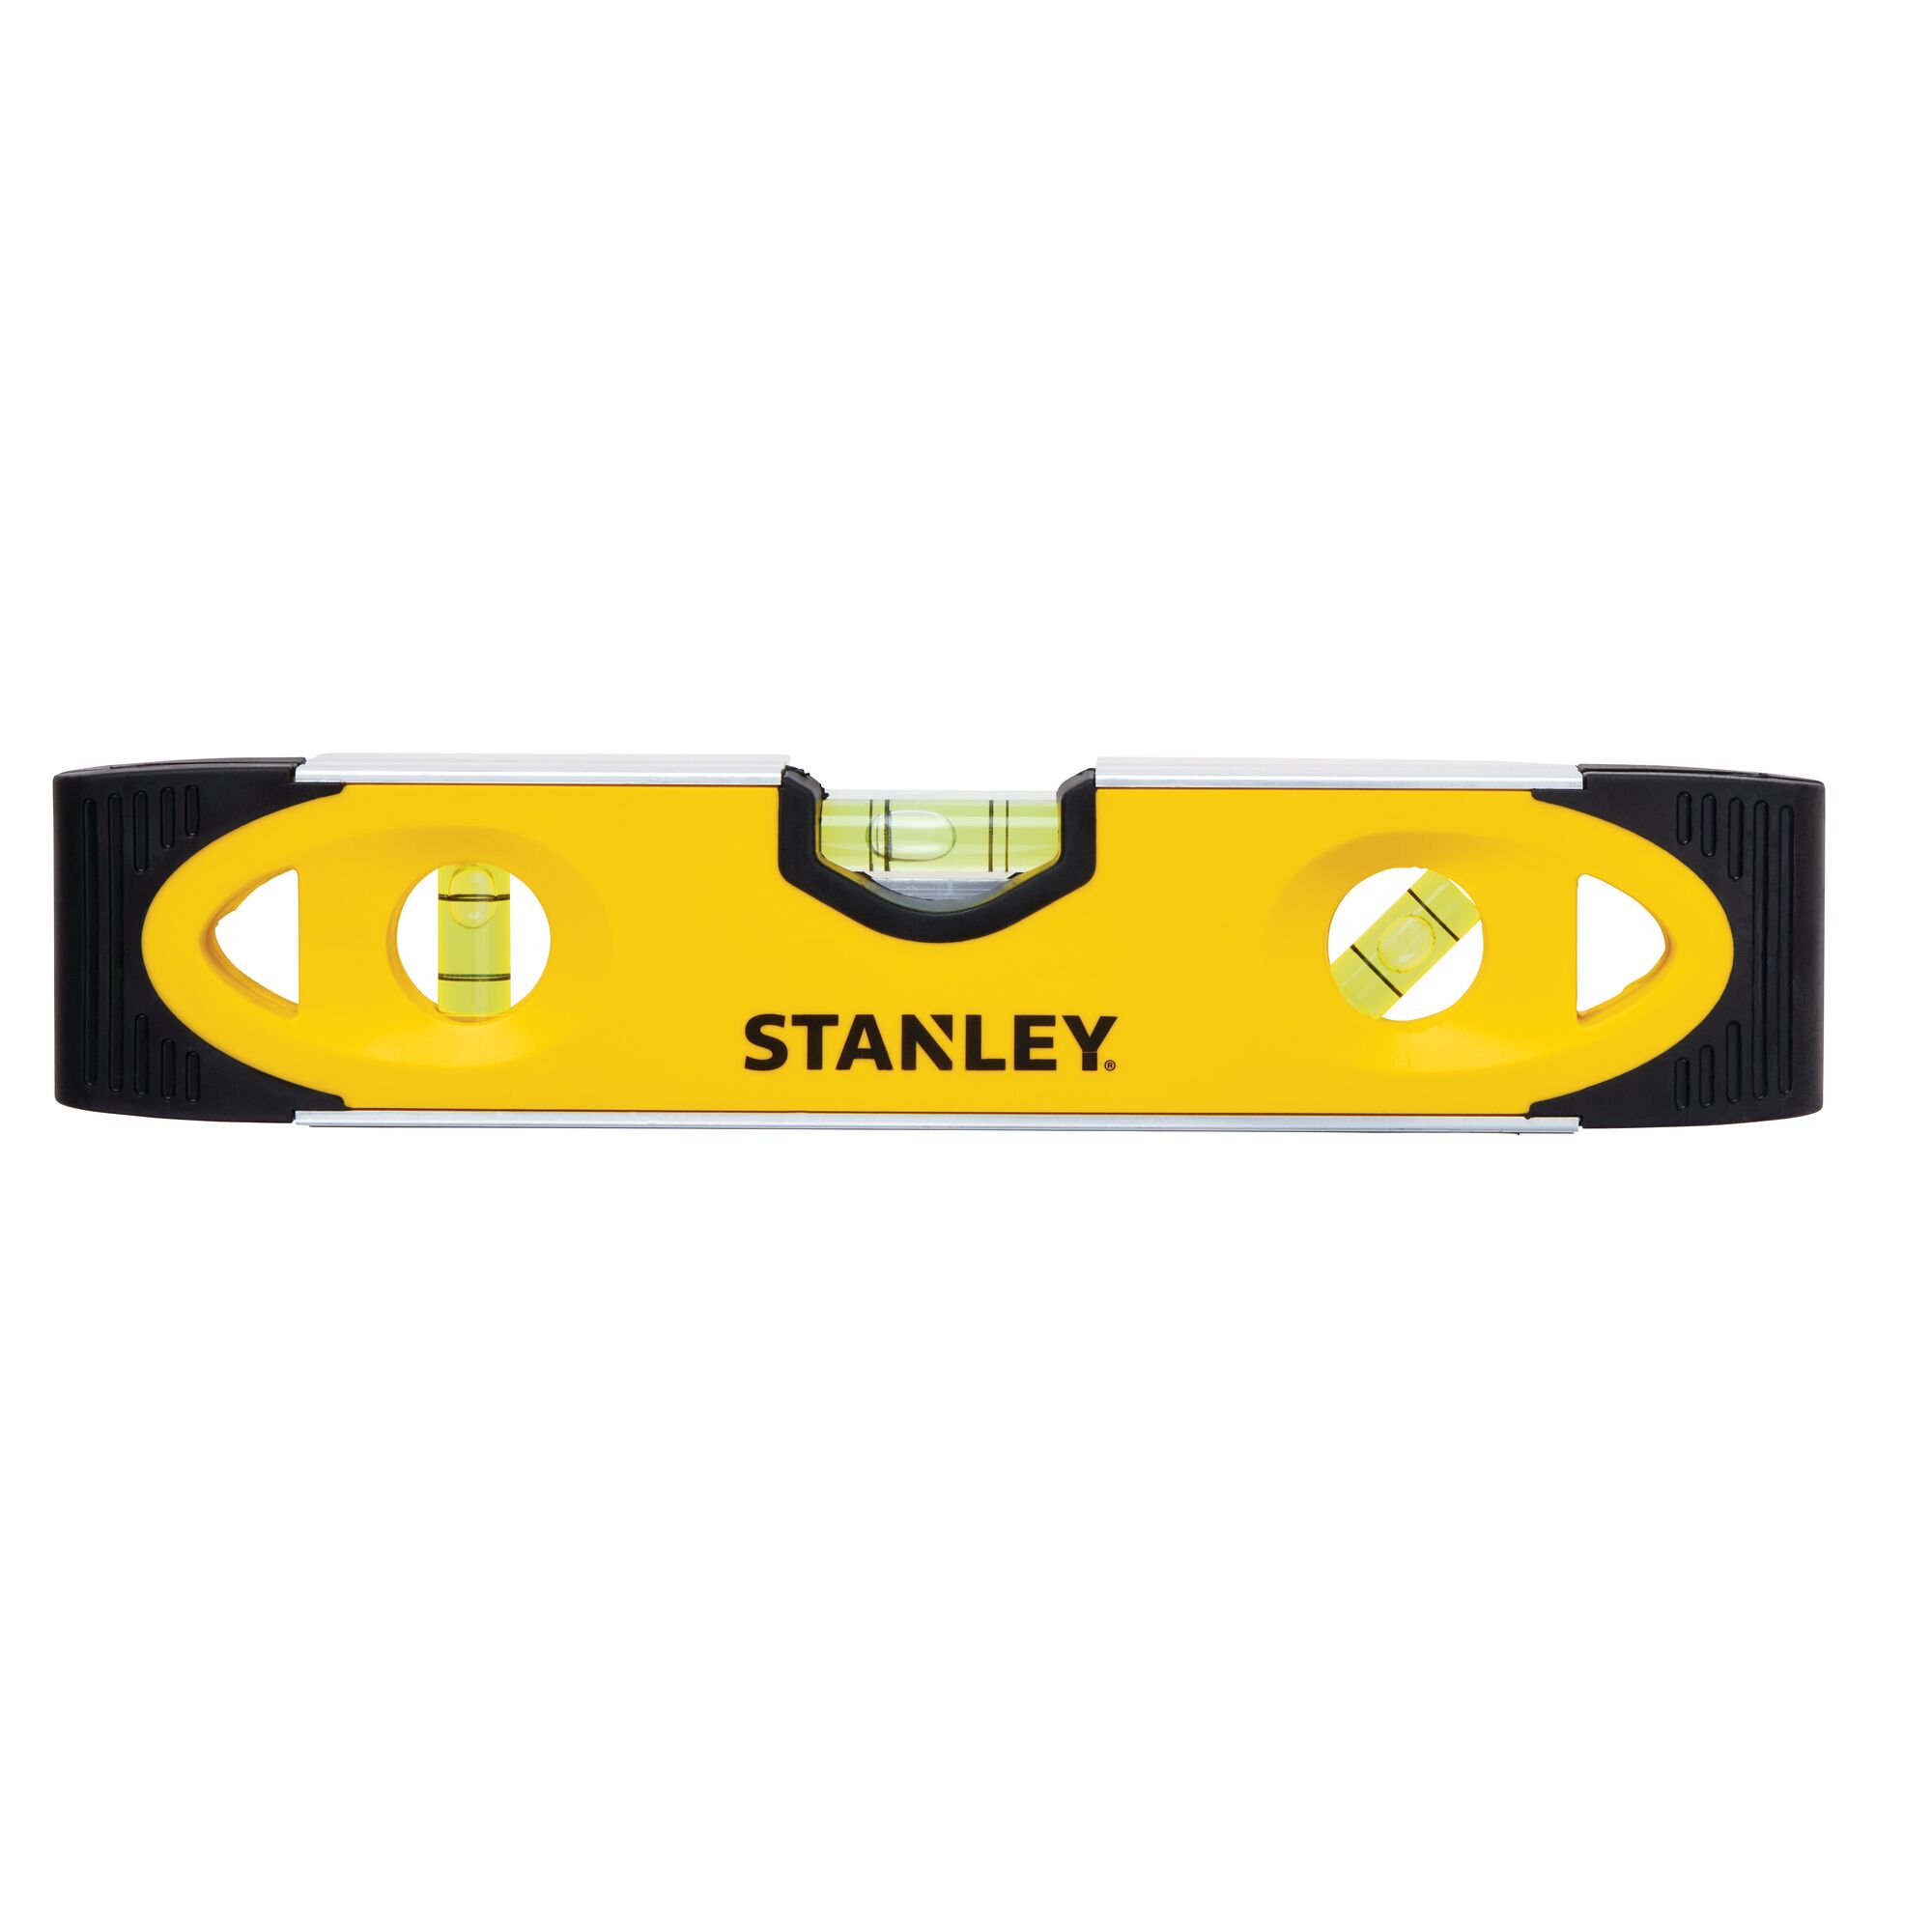 Stanley Outils High Impact Niveau torpille 43-511 main 9po 